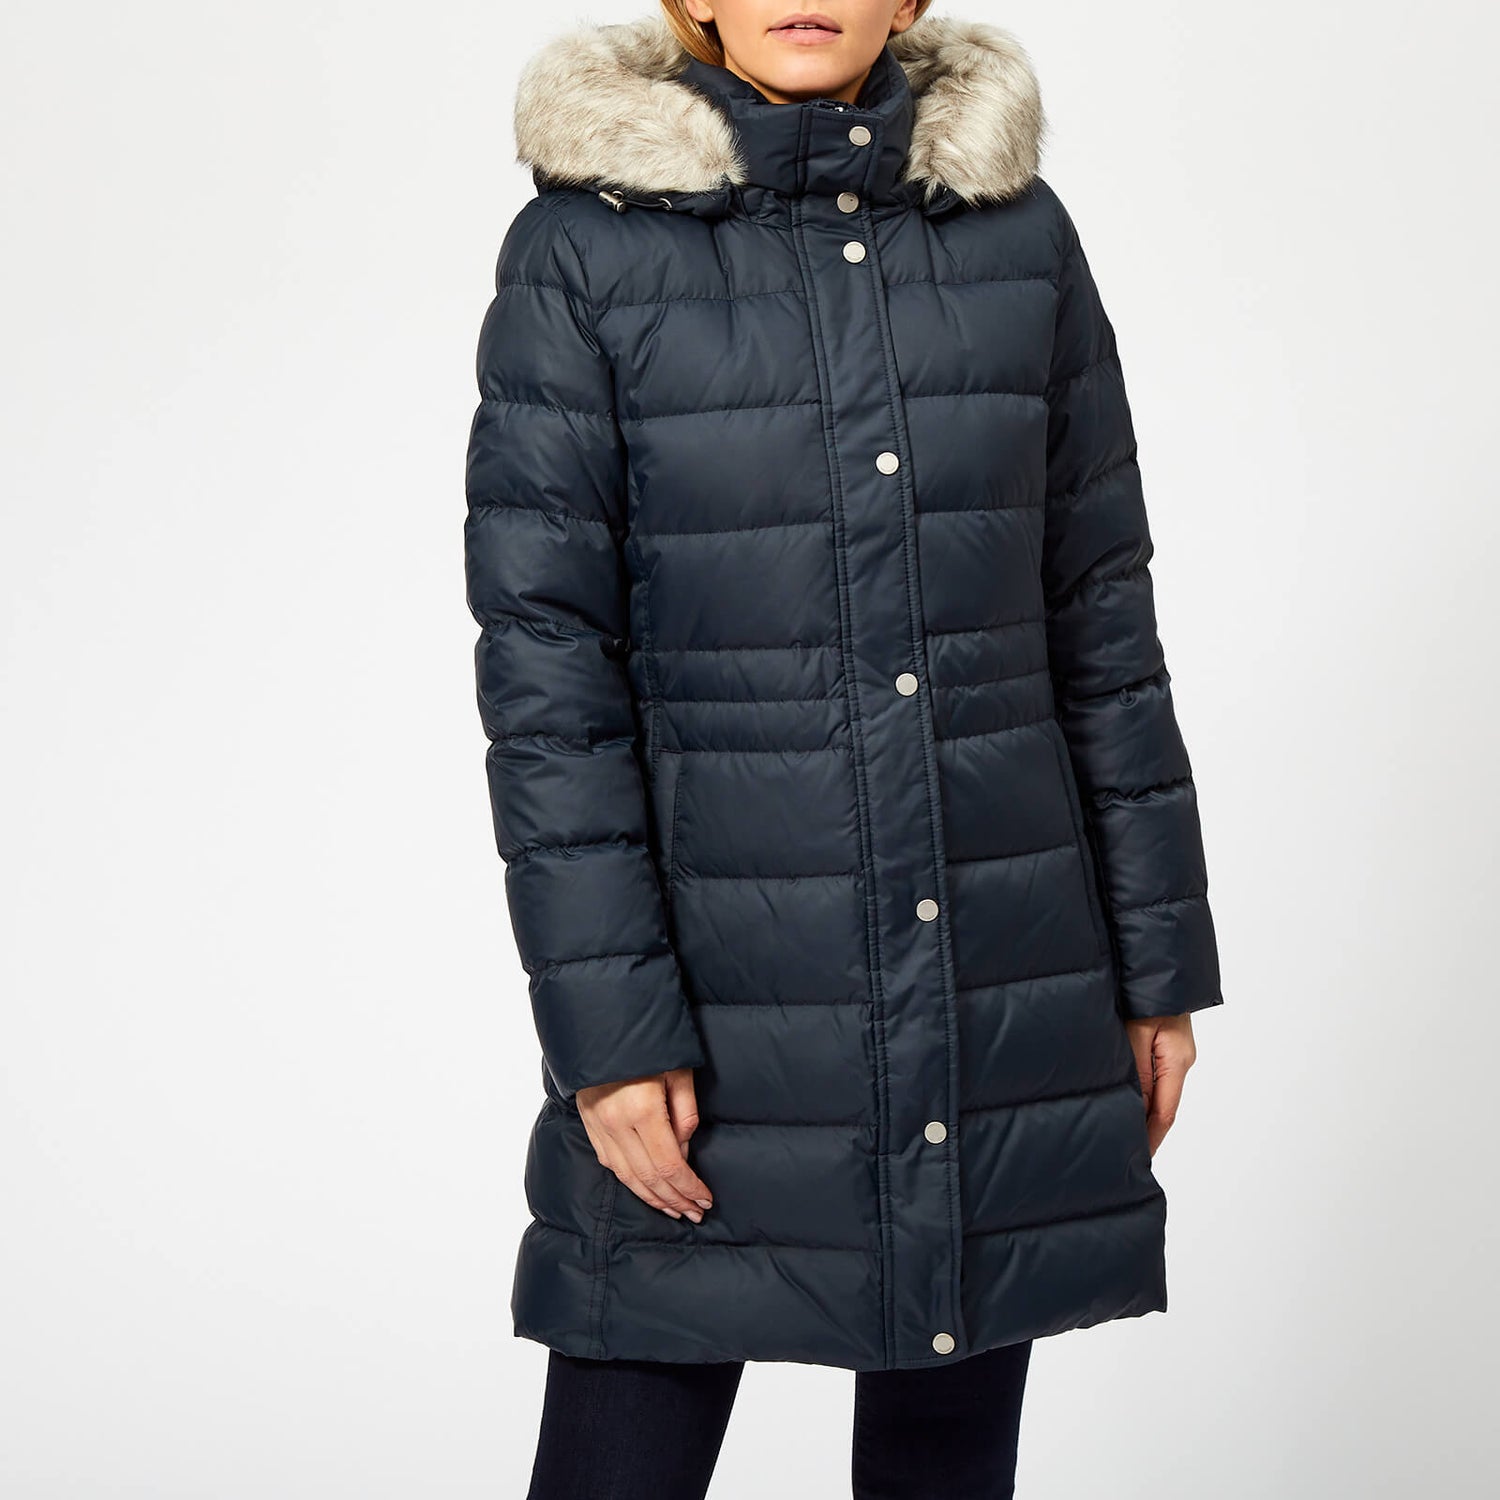 Playwright speed reservation Tommy Hilfiger Women's New Tyra Down Coat - Midnight | TheHut.com